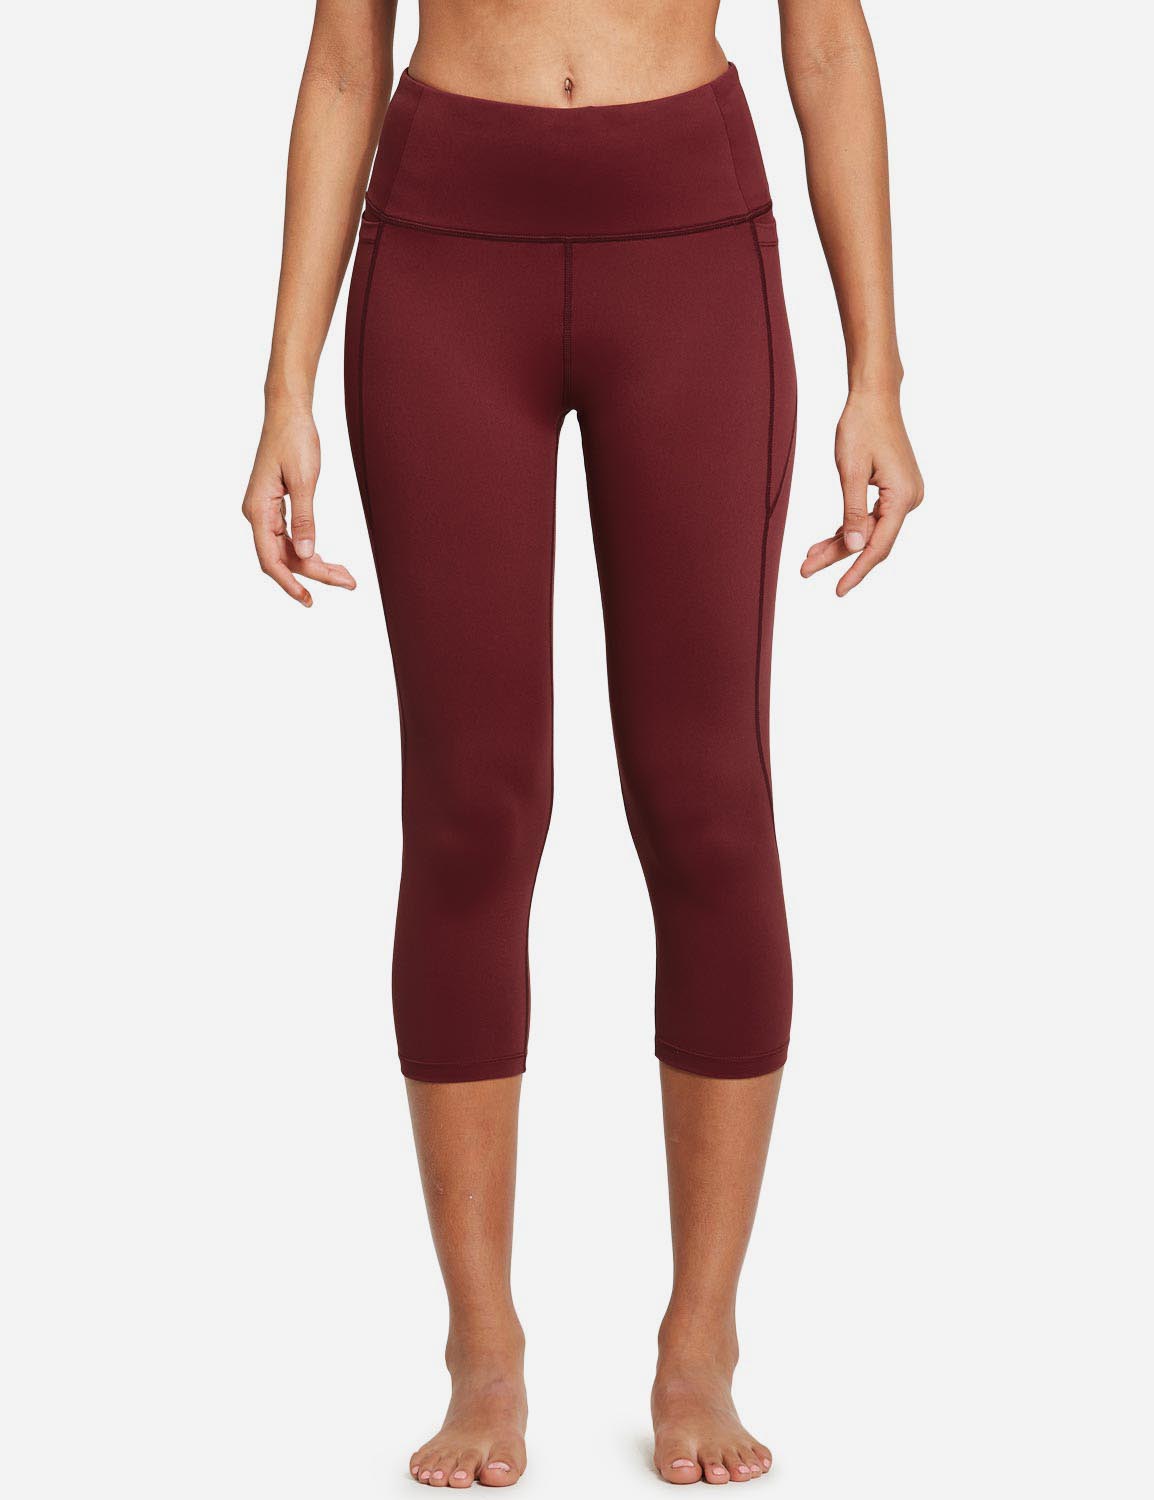 Baleaf Women's High Rise Bottom Contour Pocketed Capris abh168 Wine Red Front